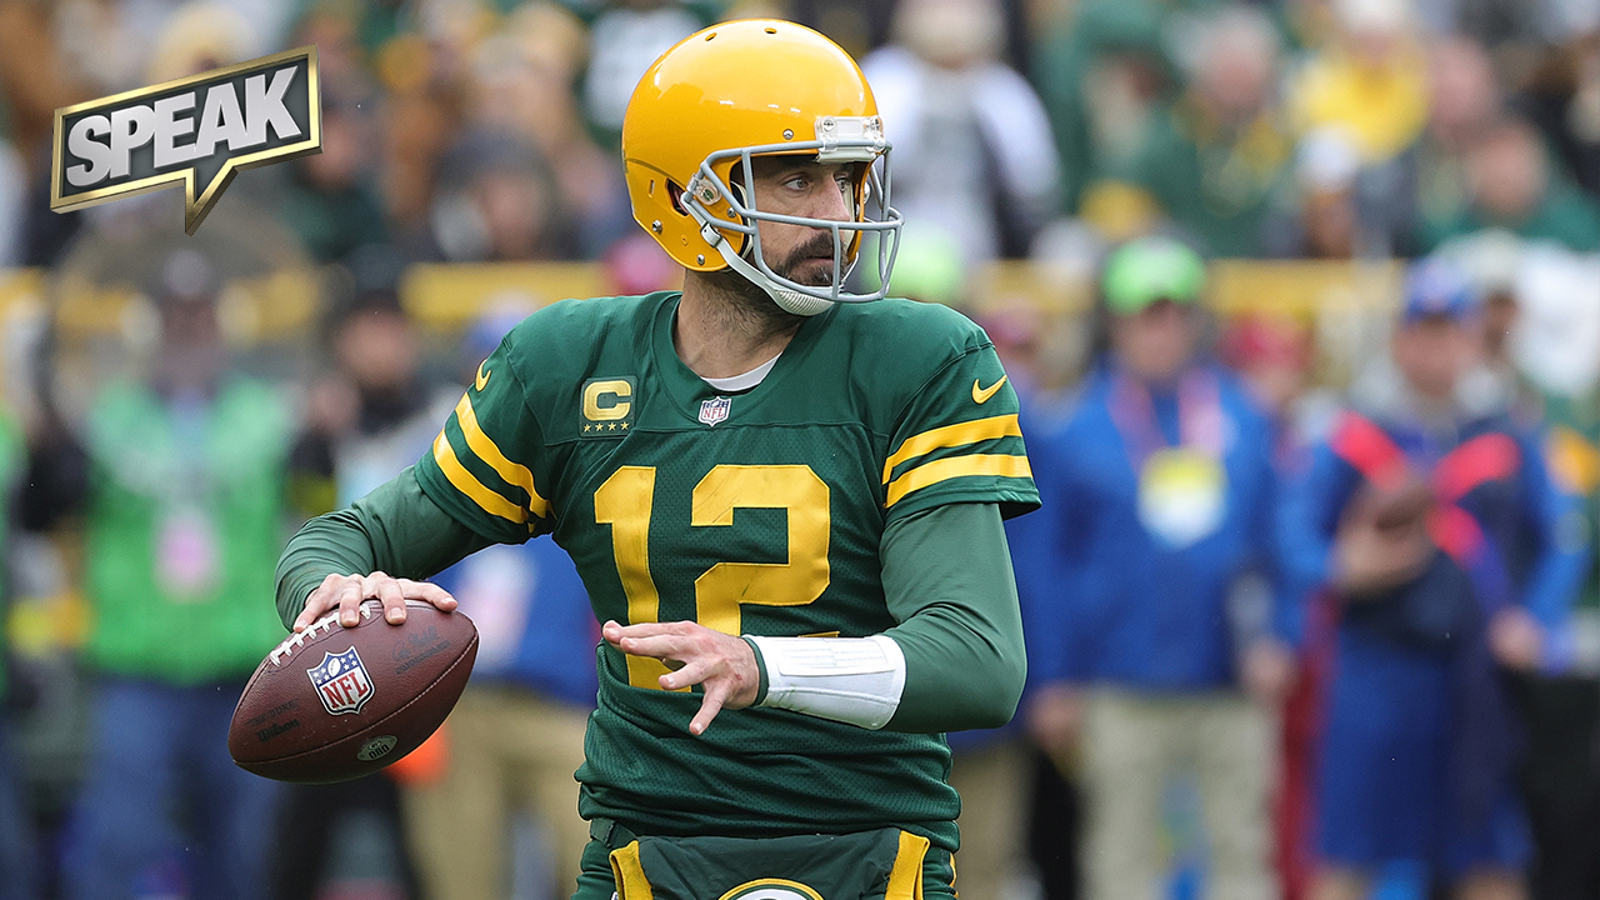 Jets or Packers: Who won the Aaron Rodgers trade?